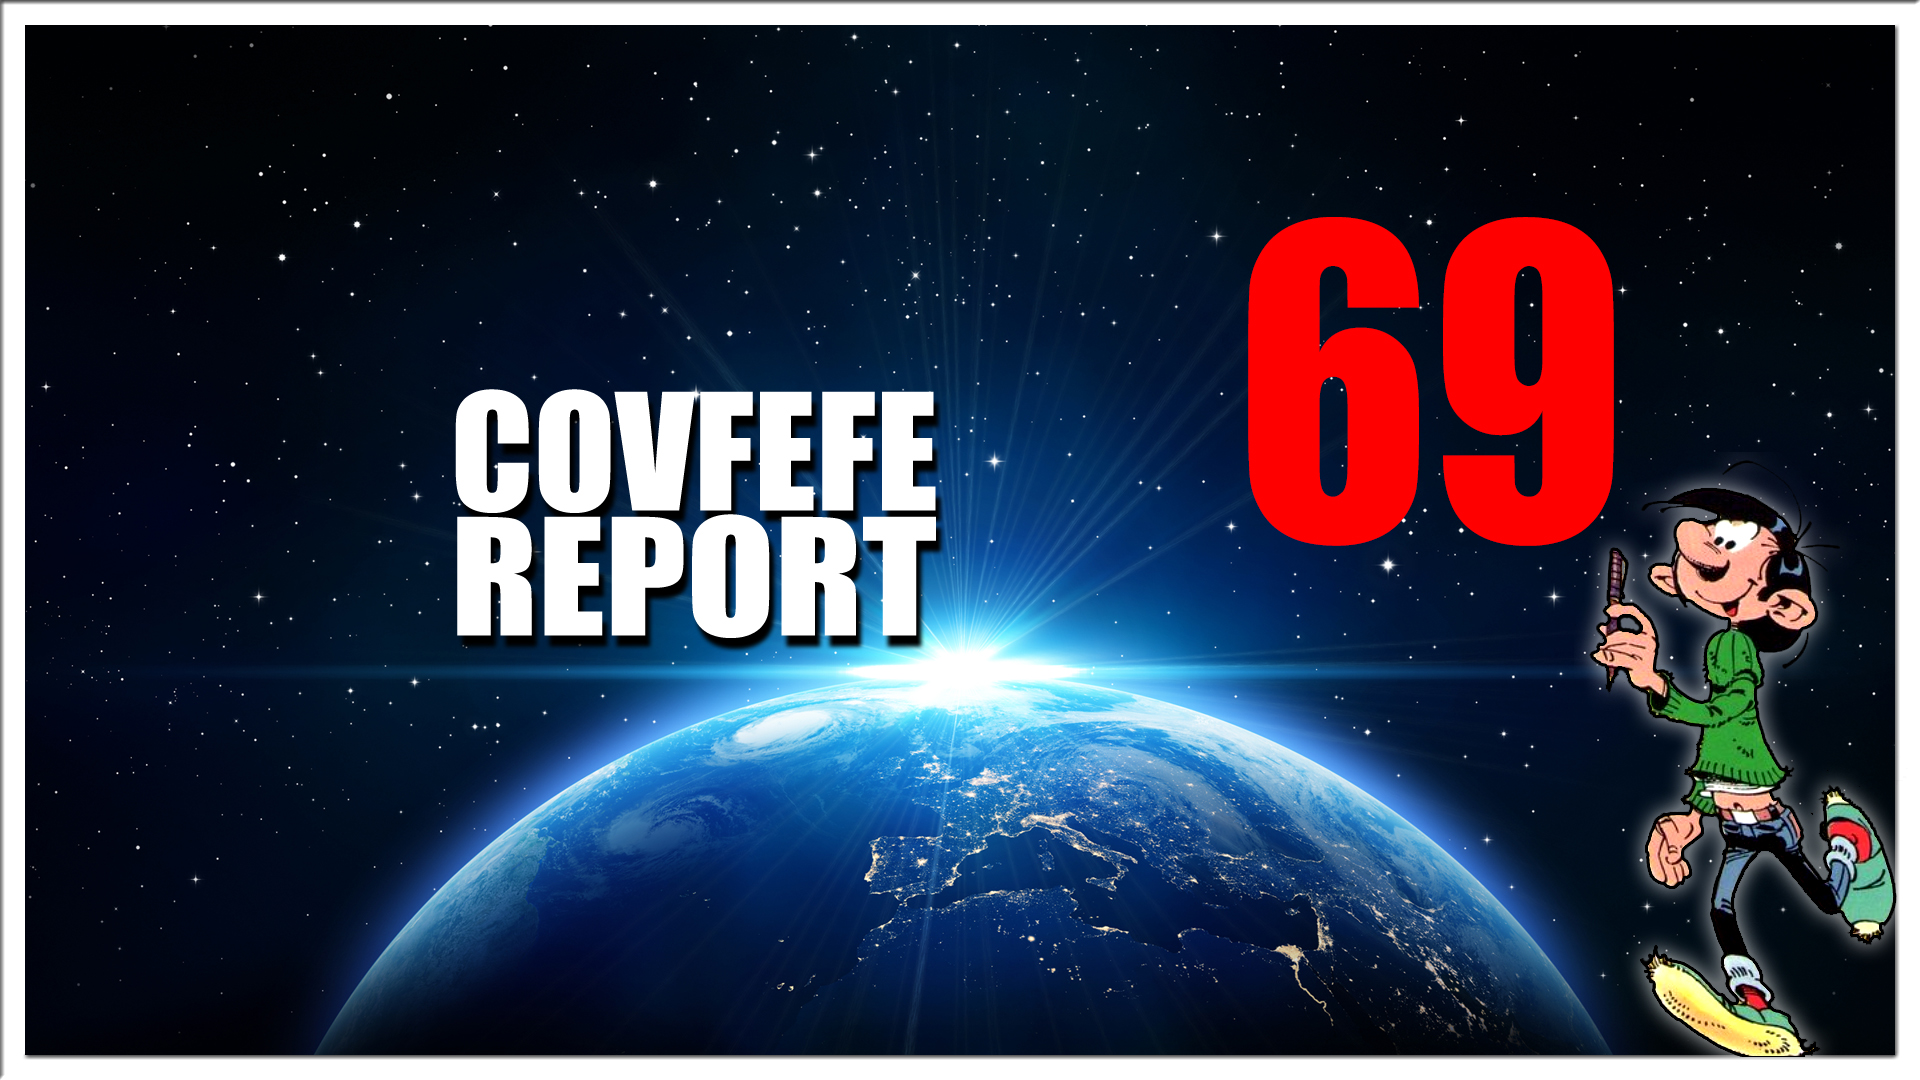 Covfefe Report 69. Something BIG is coming, Happy New Q Year